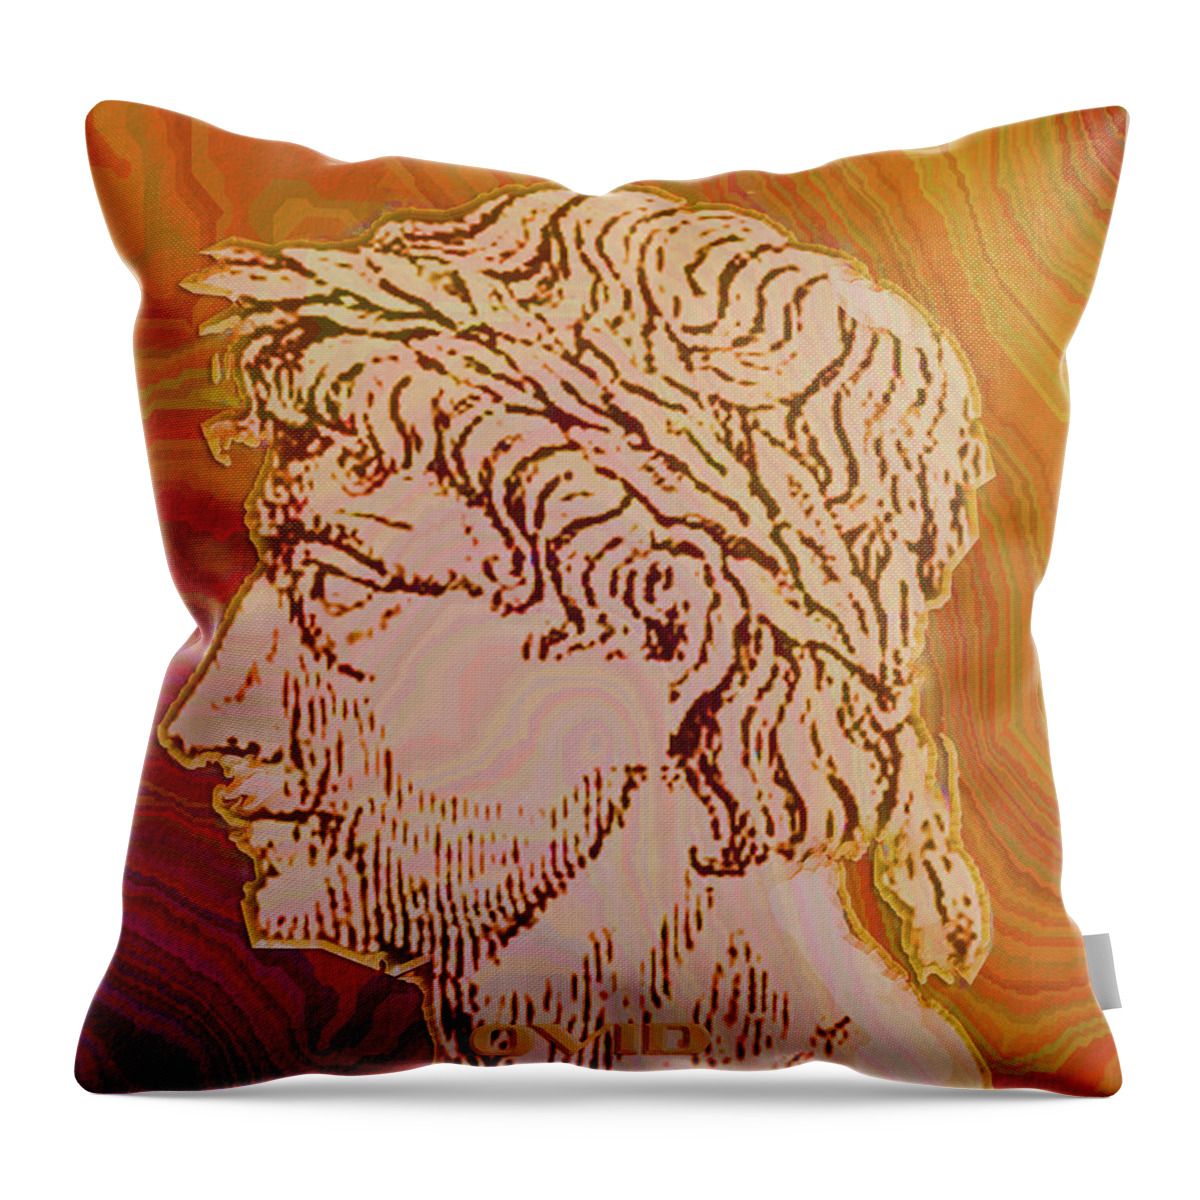 Ovid Throw Pillow featuring the digital art Ovid by Asok Mukhopadhyay